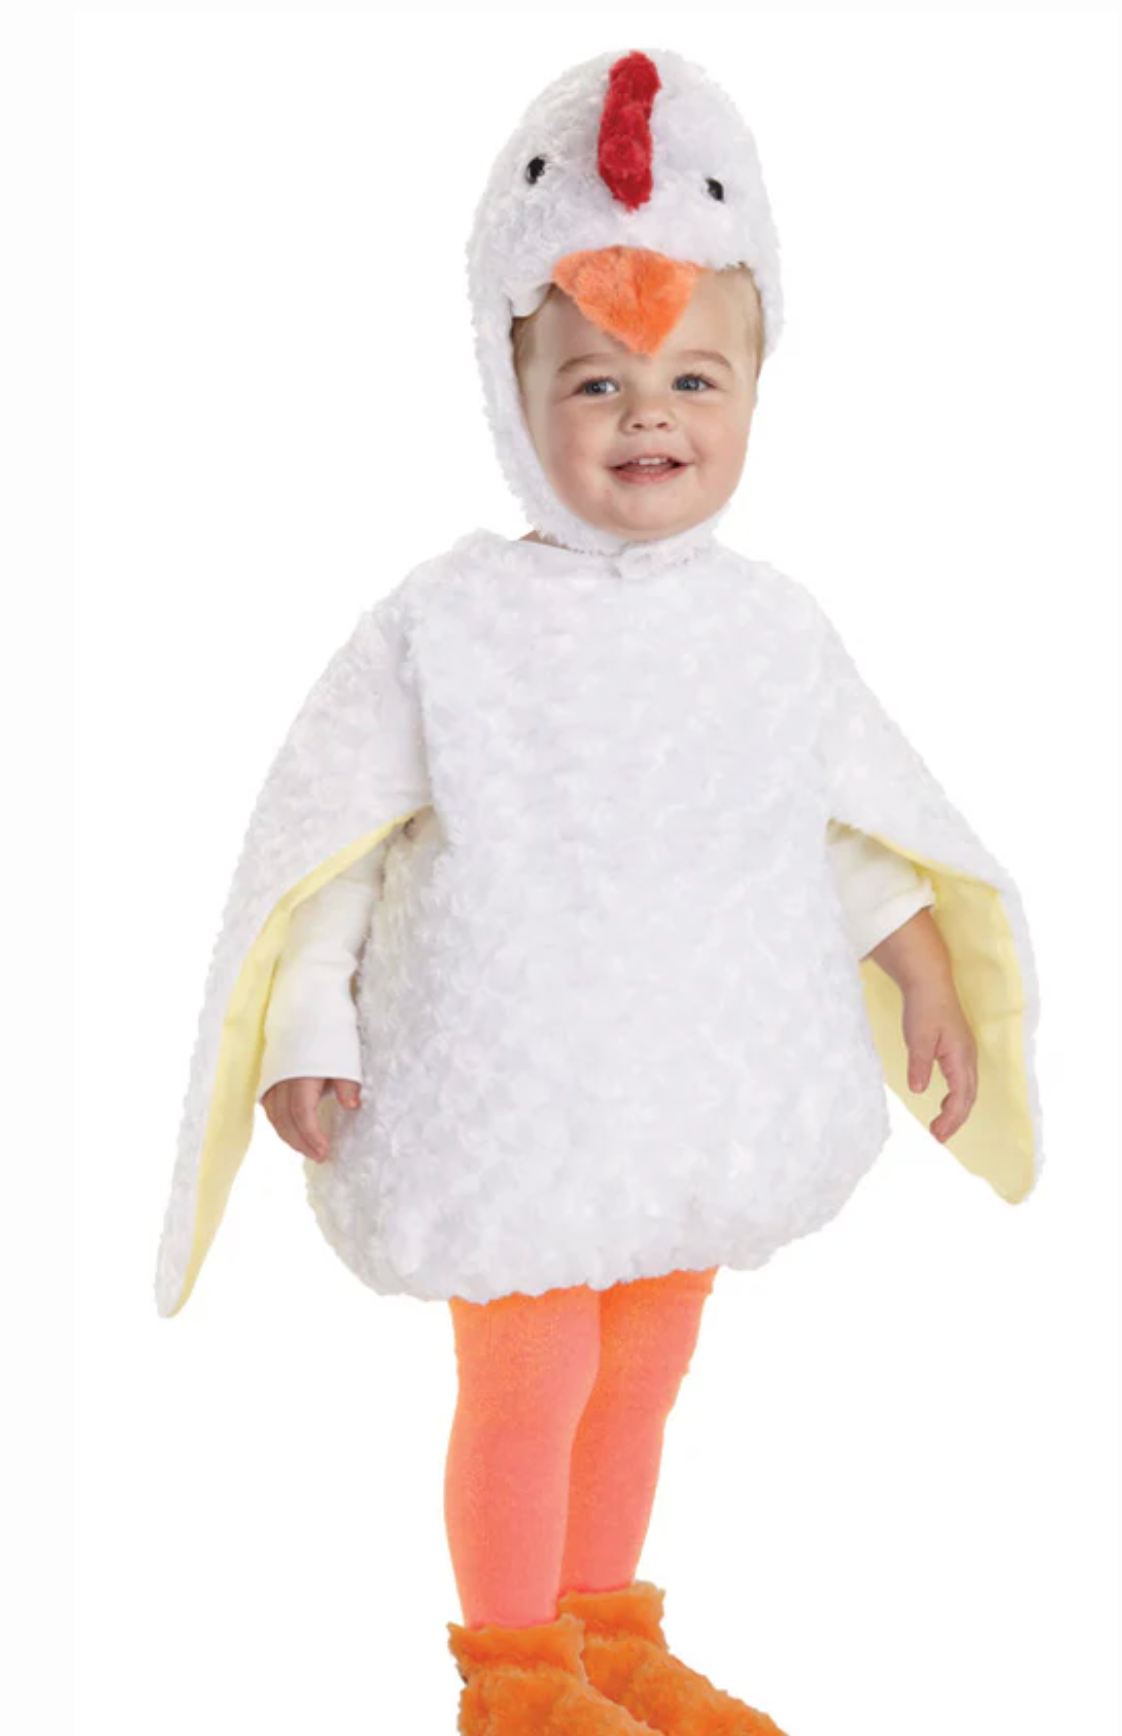 Feathered Fun: Creating Heartwarming Halloween Memories with Your Little Chick